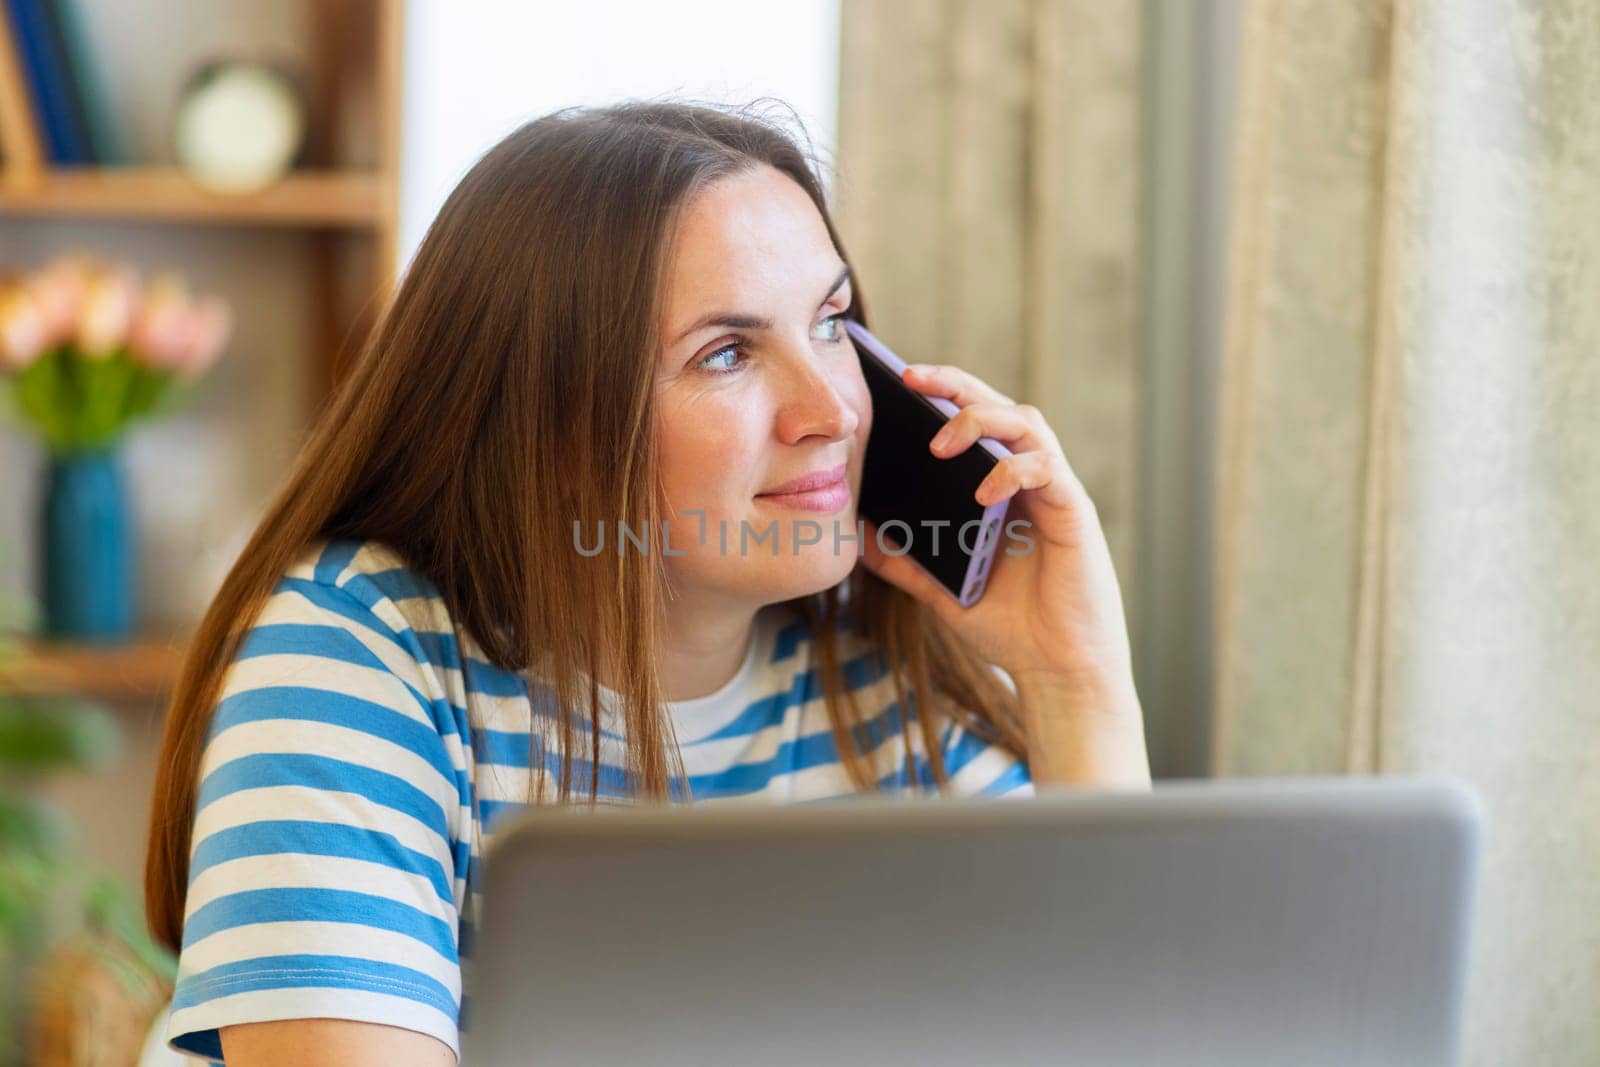 Smiling woman having a phone conversation while working on a laptop at home.